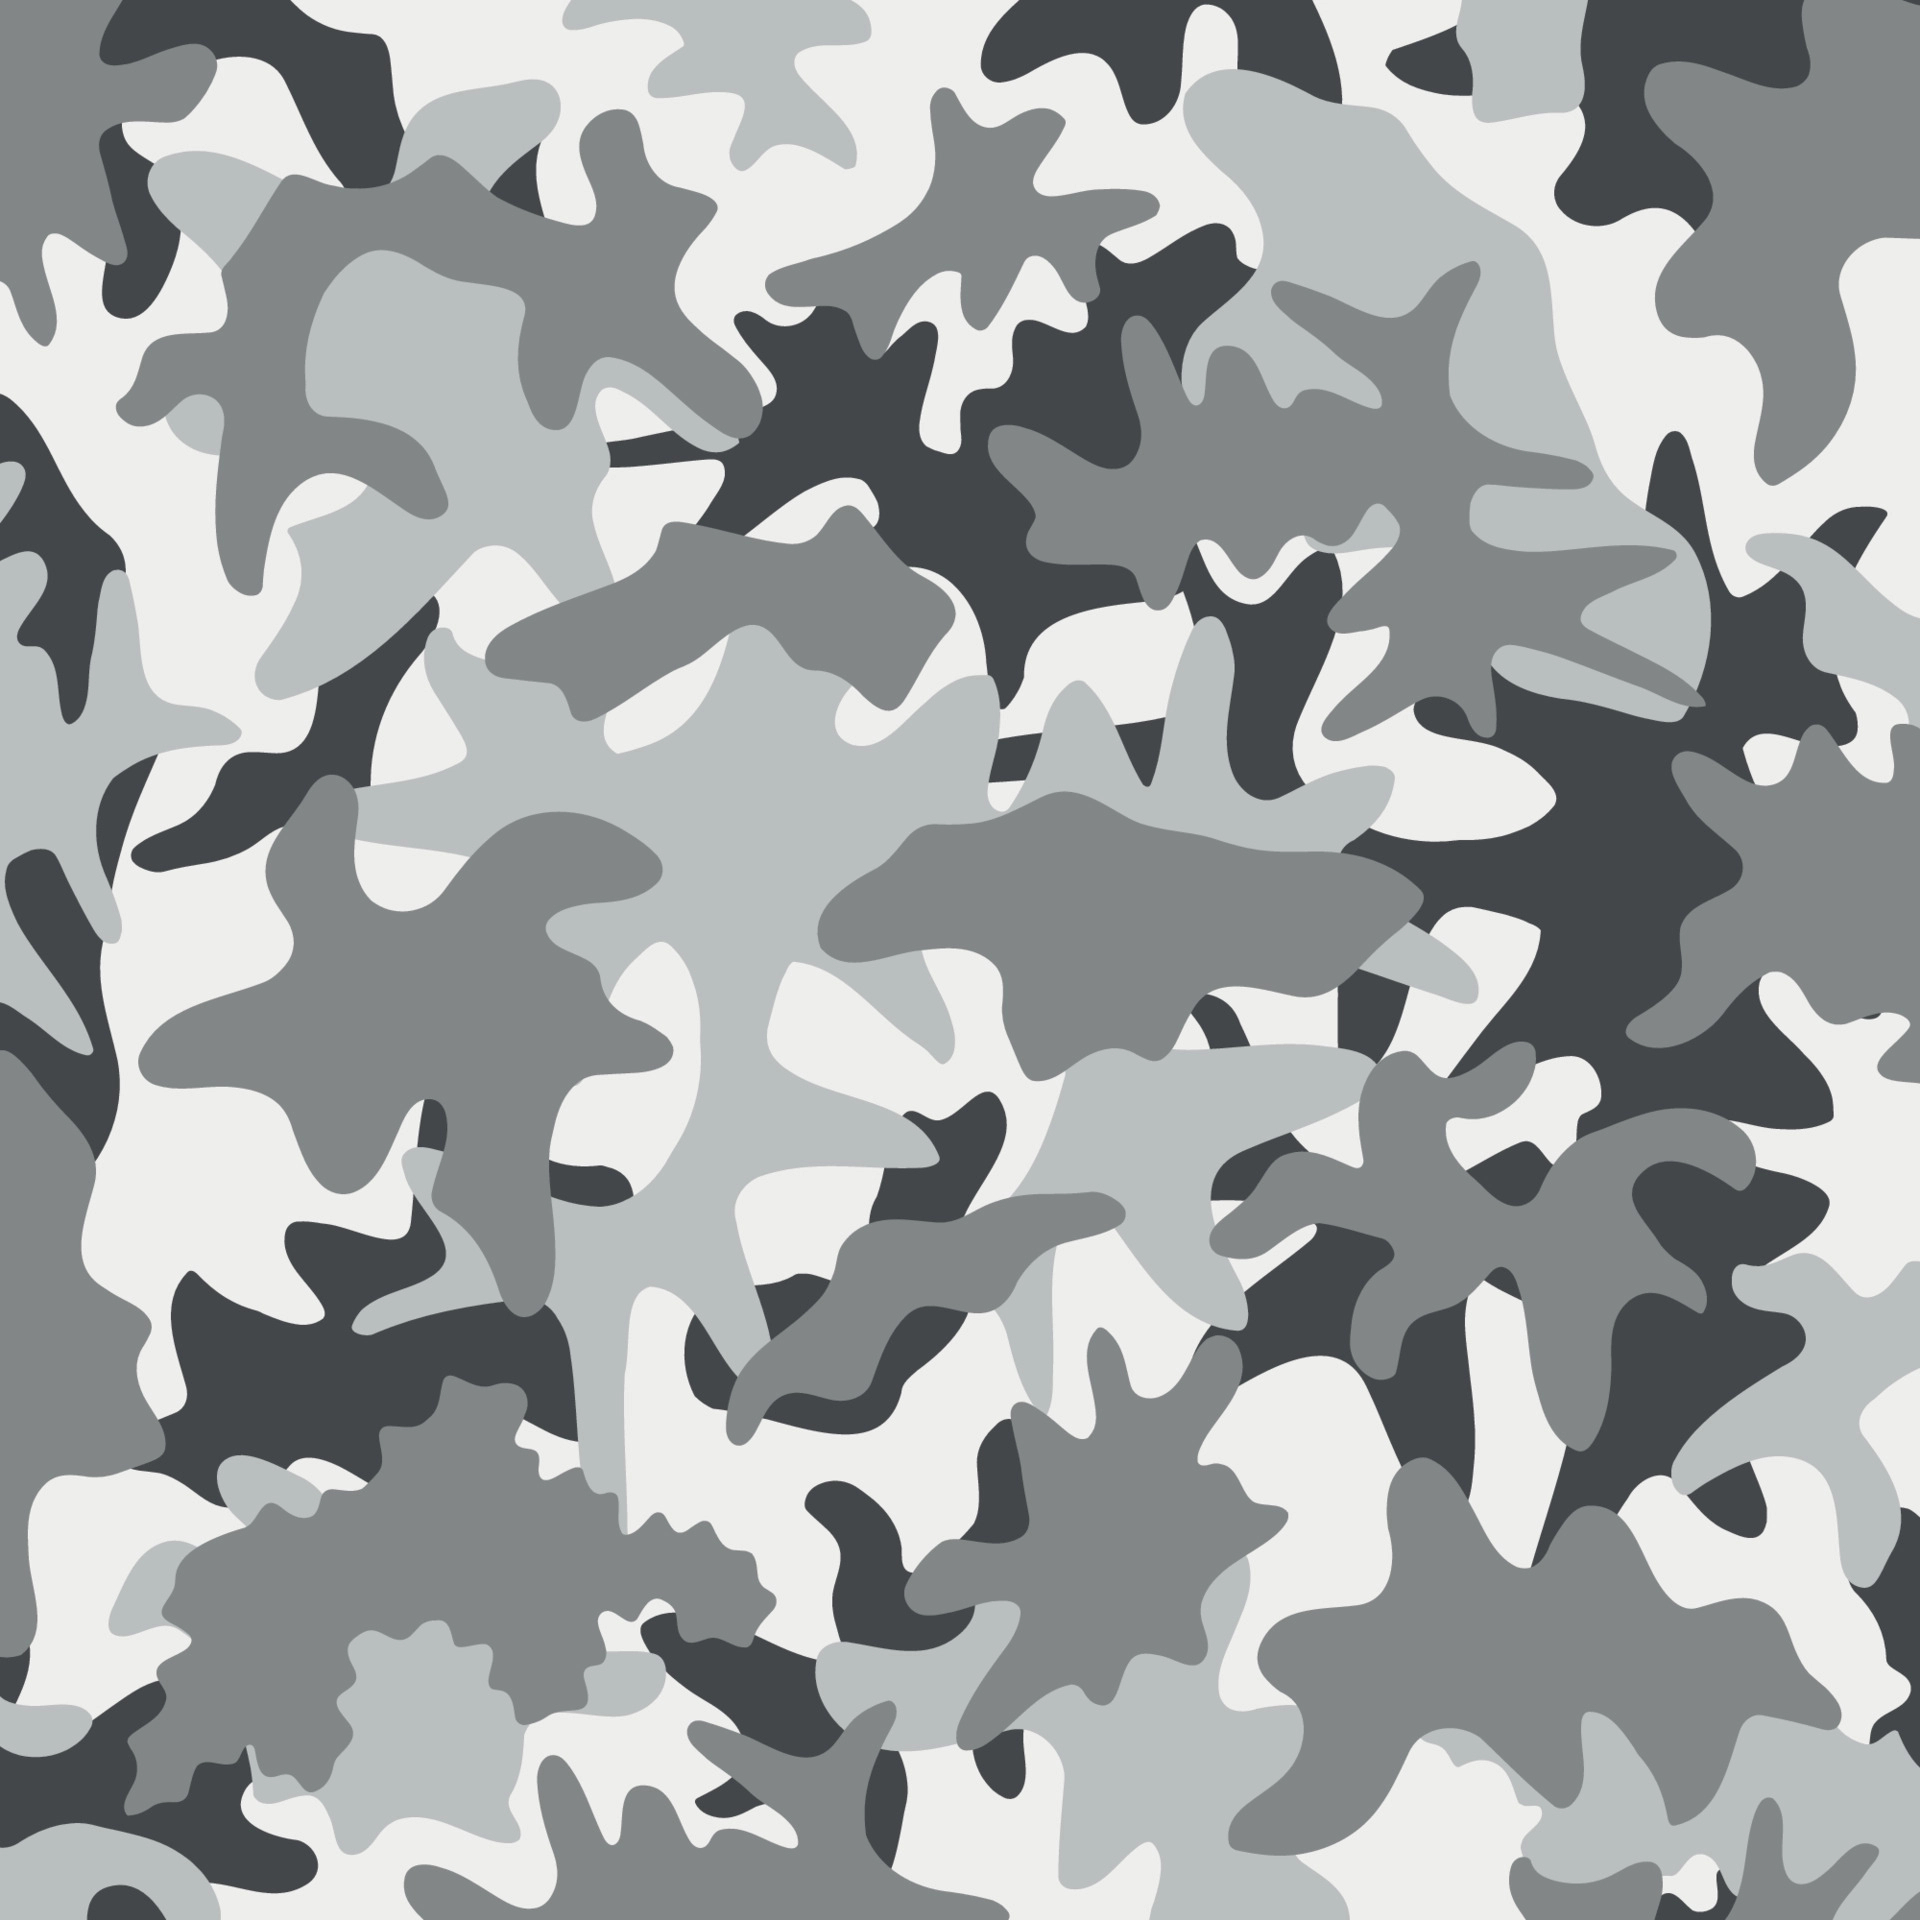 1920x1920 winter snow gray soldier stealth battlefield urban city camouflage stripes pattern military background concept 5422999 Vector Art